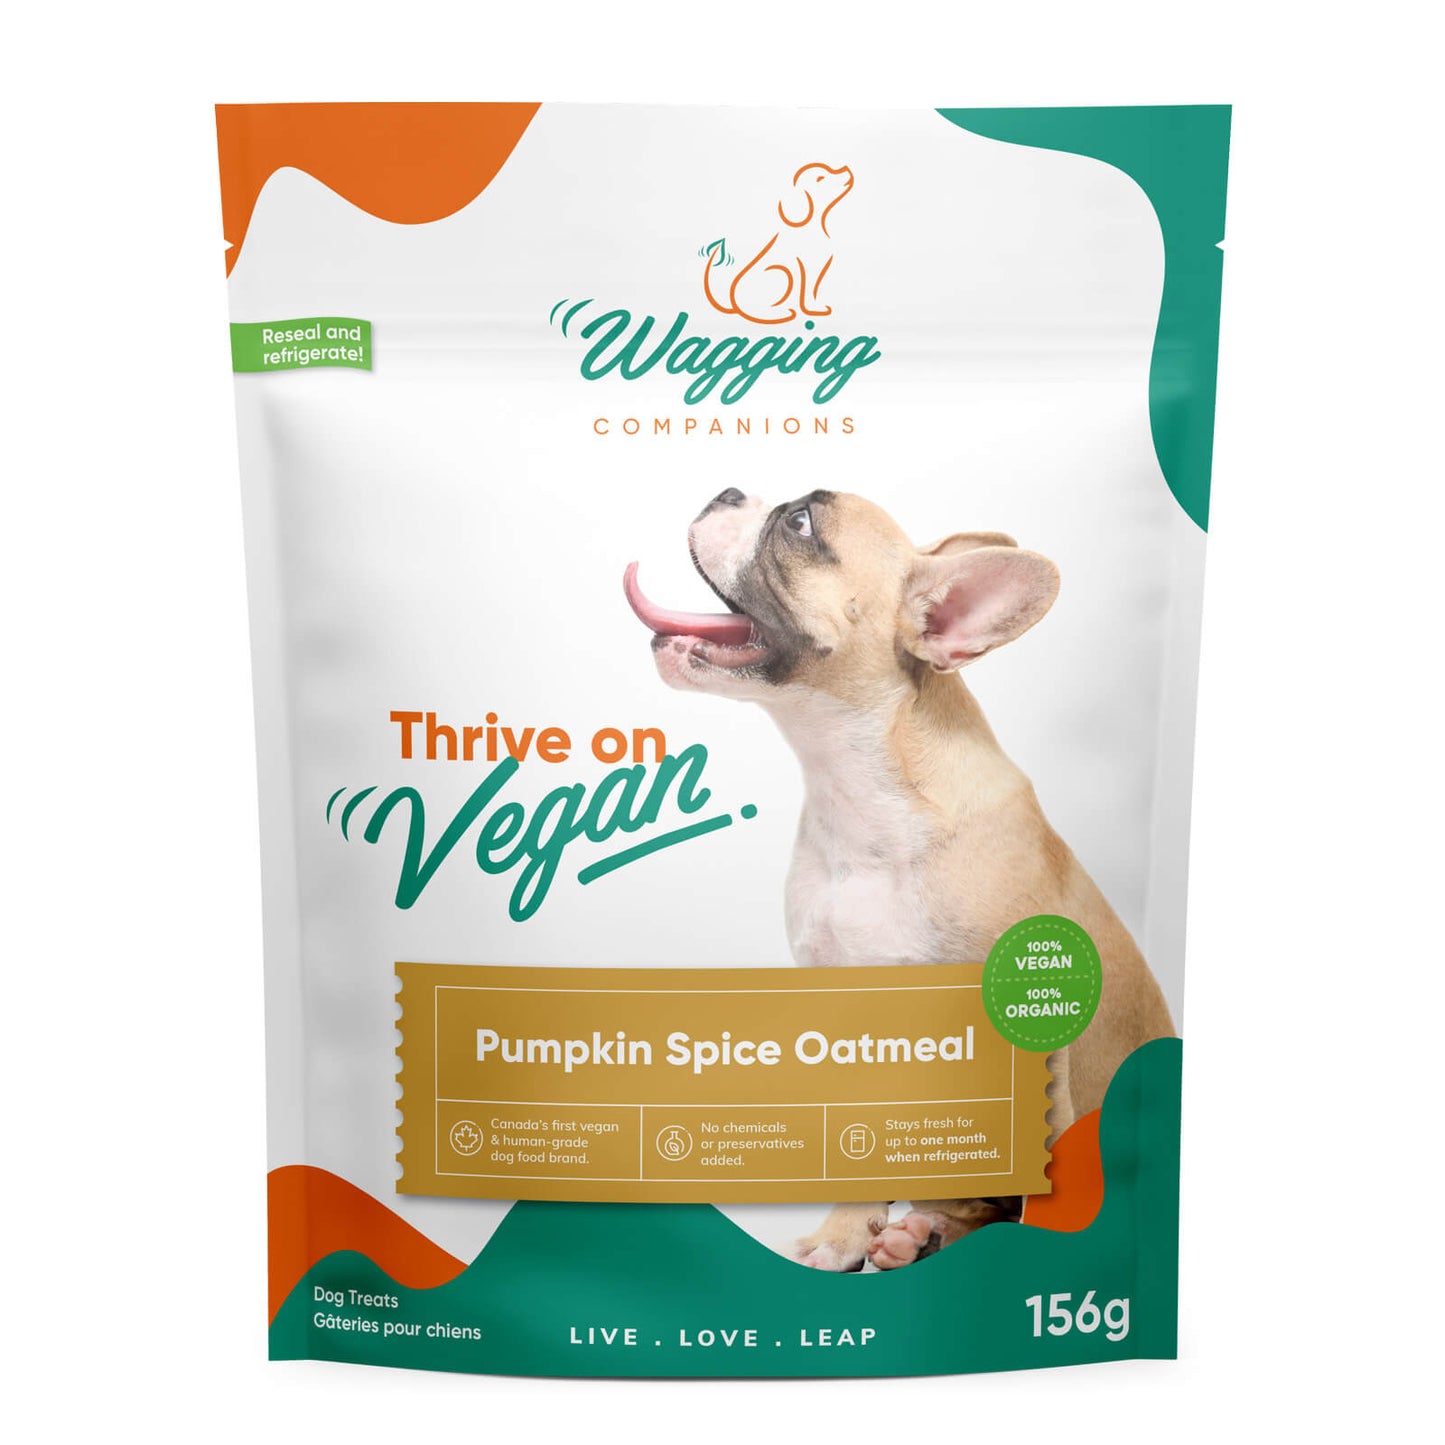 Front view of Wagging Companions' pumpkin spice oatmeal blend dog treat packaging. The package highlights the enticing pumpkin spice oatmeal blend, in line with the brand's 'Thrive on Vegan' commitment, offering a flavorful, plant-based option for pet owners seeking varied and wholesome treats.